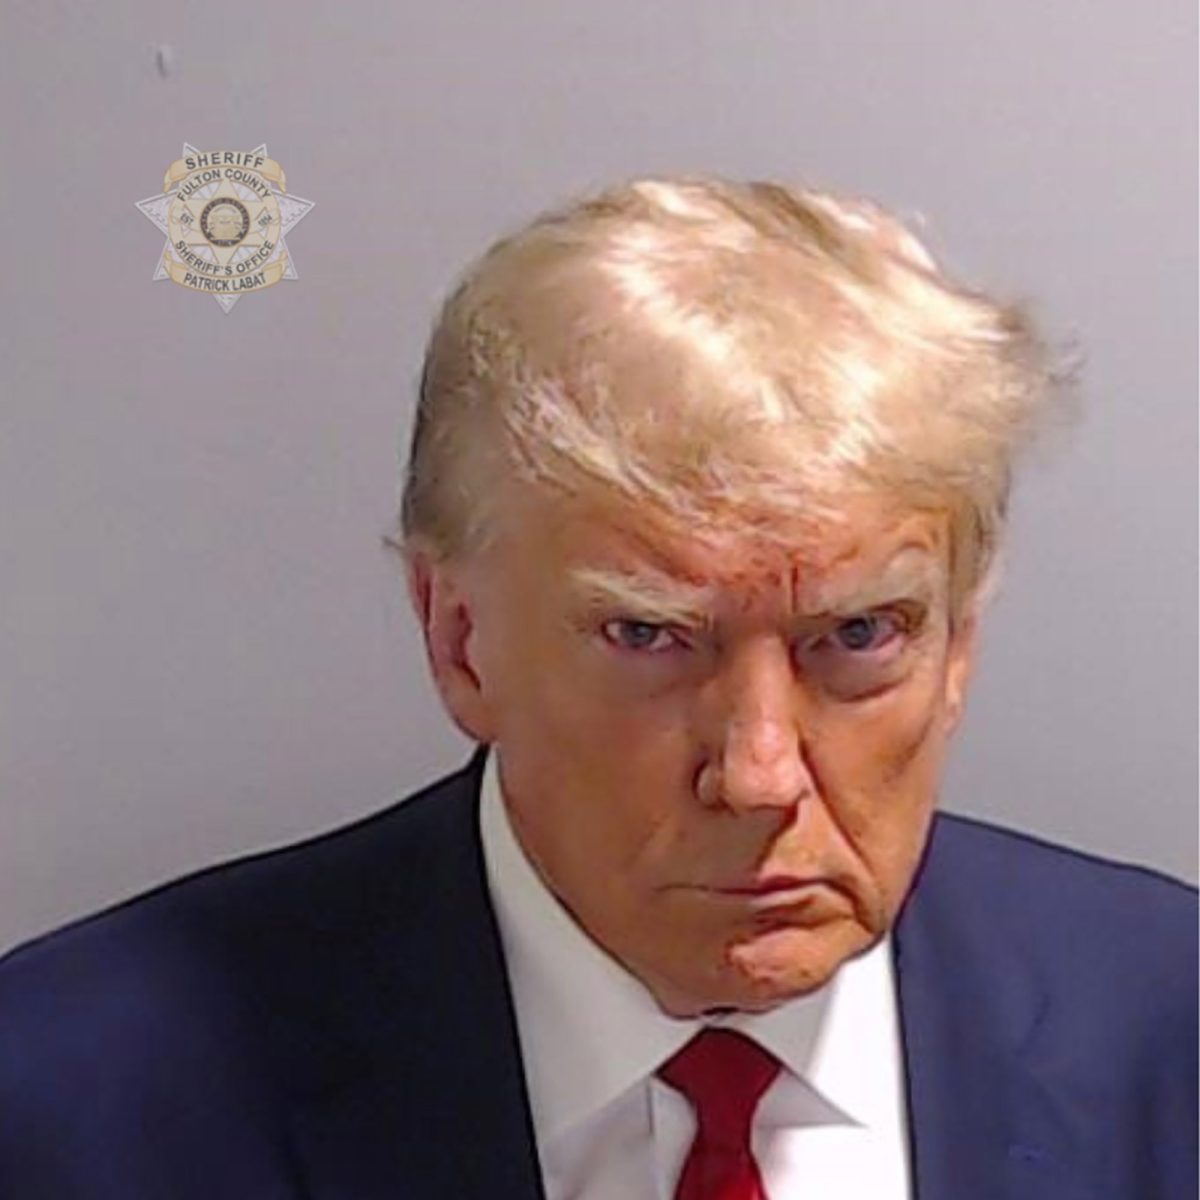 Trump getting his picture taken for his mugshot where he was reported at 6’3 and 215 lbs.
